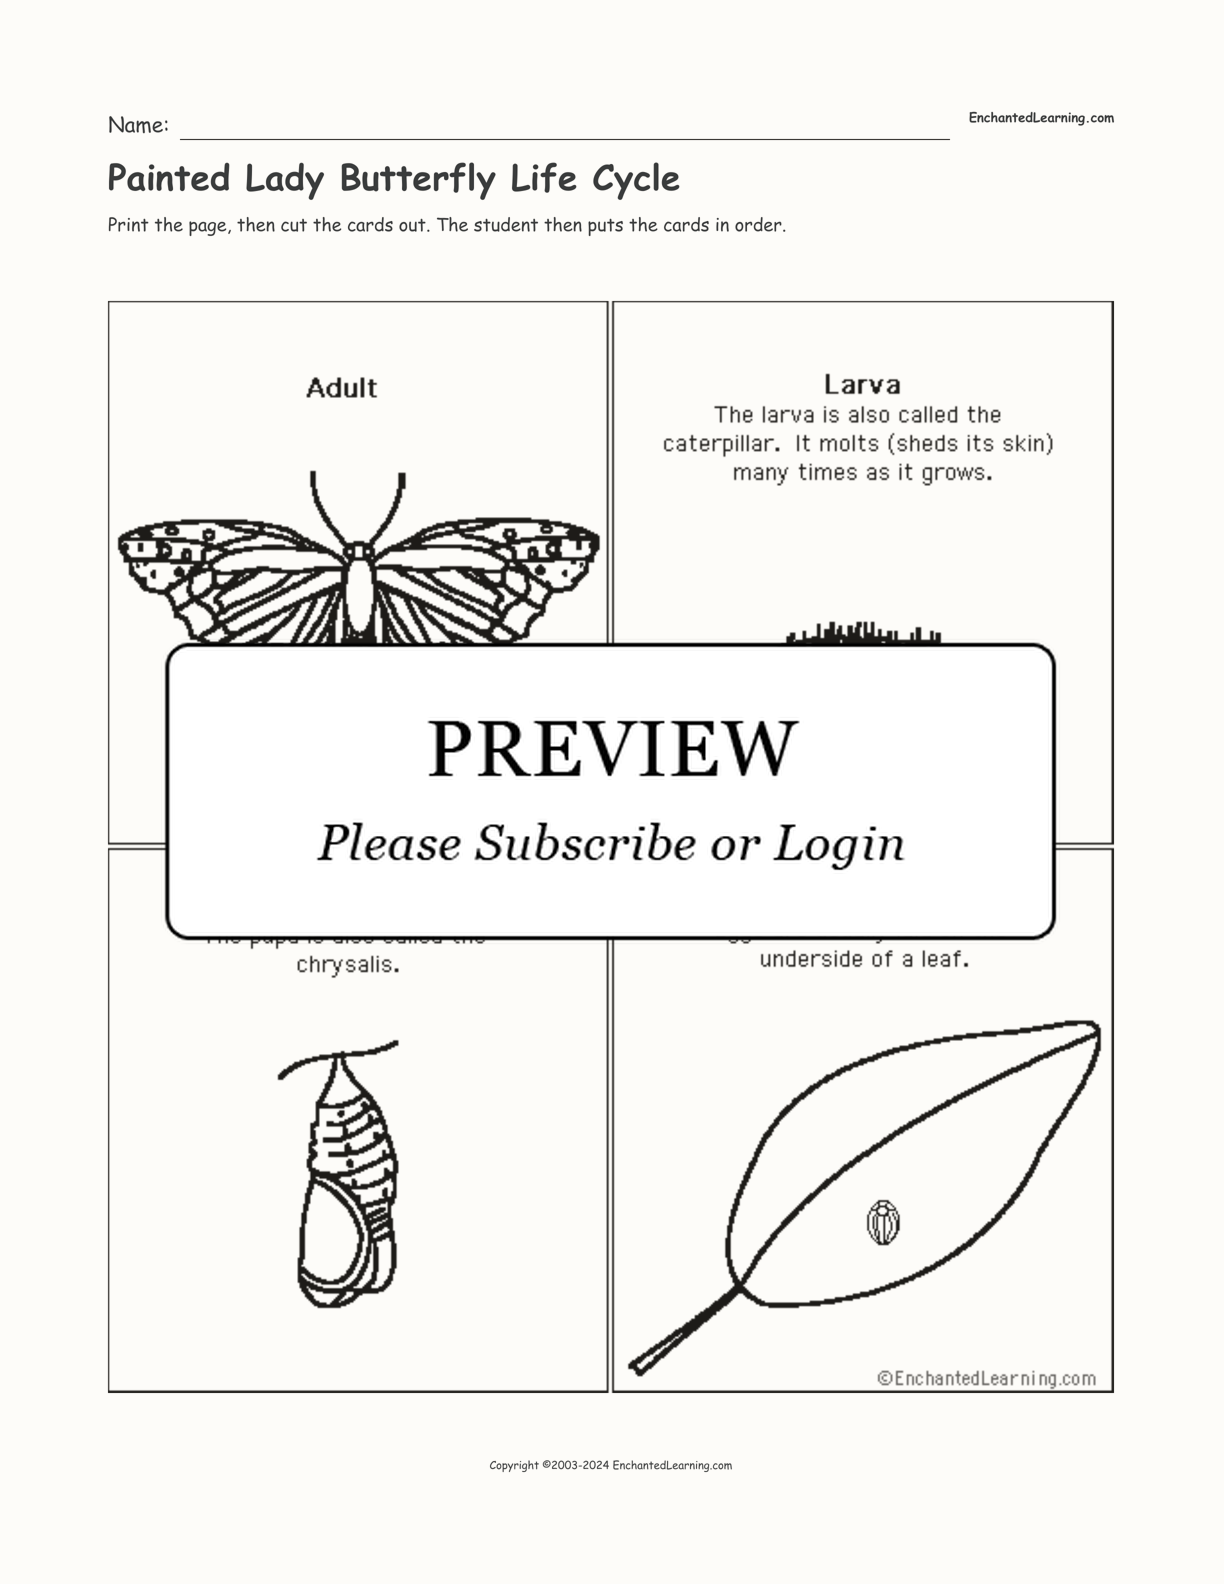 Painted Lady Butterfly Life Cycle interactive worksheet page 1